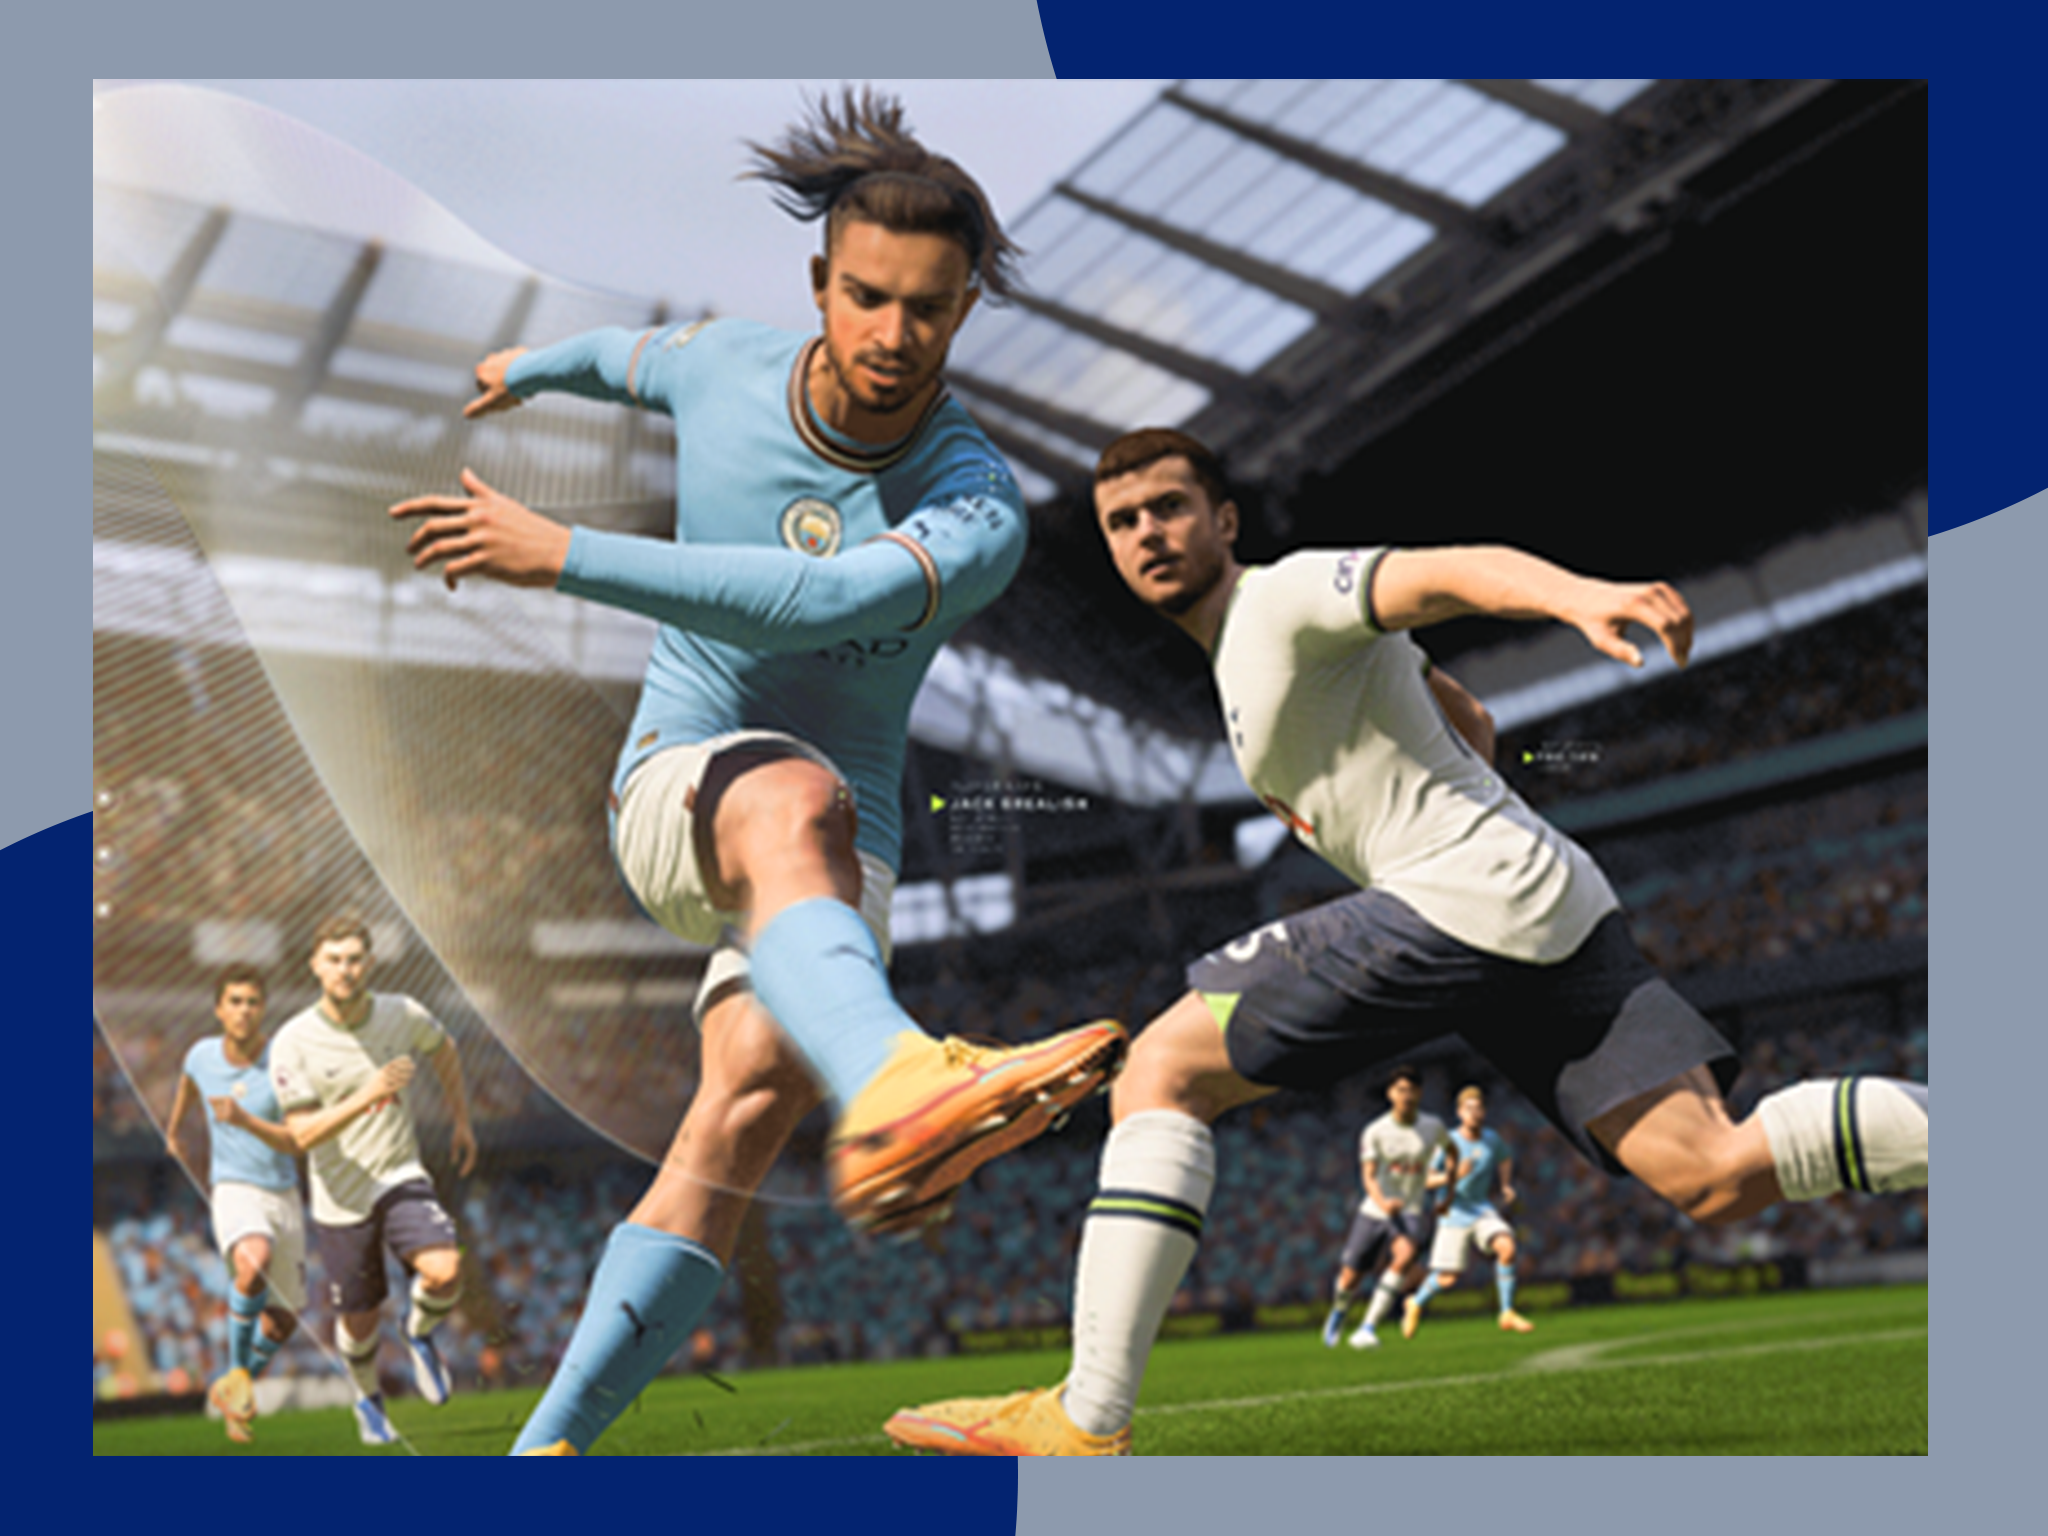 FIFA 23 PC: All you need to know as Next Gen hits the platform